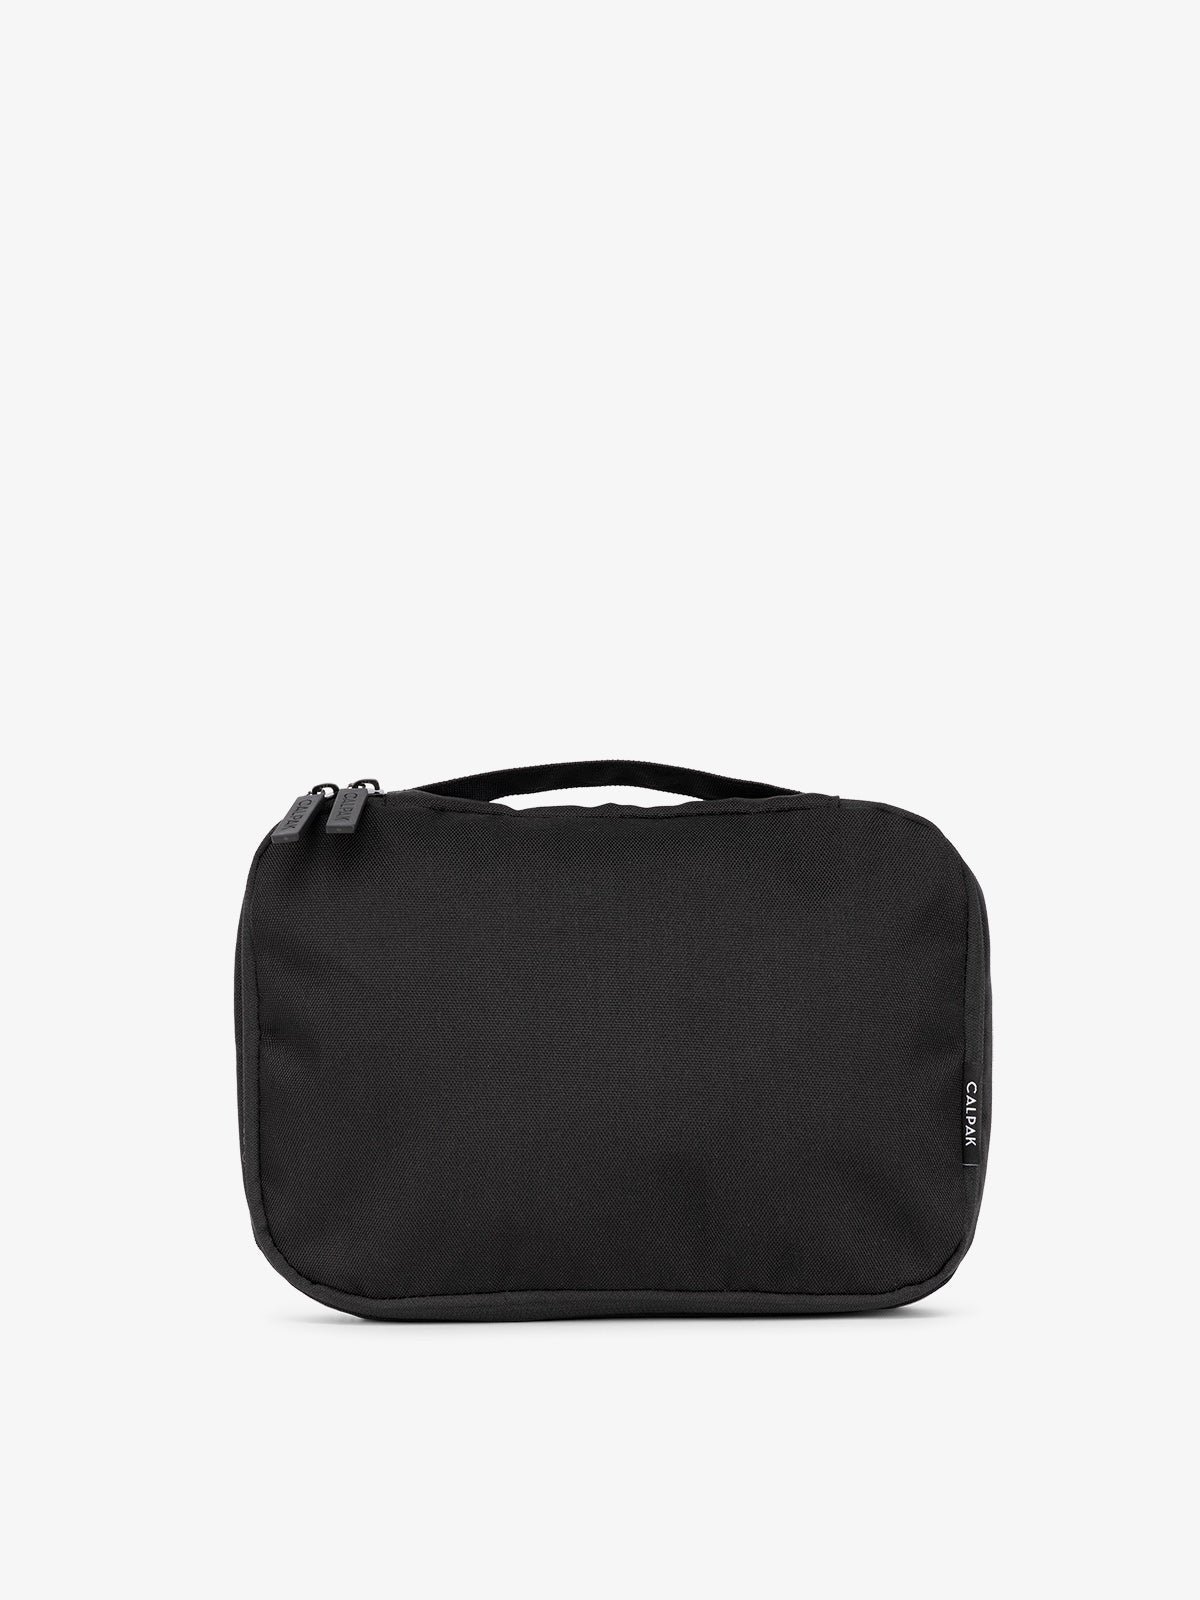 CALPAK small packing cubes with top handle in black